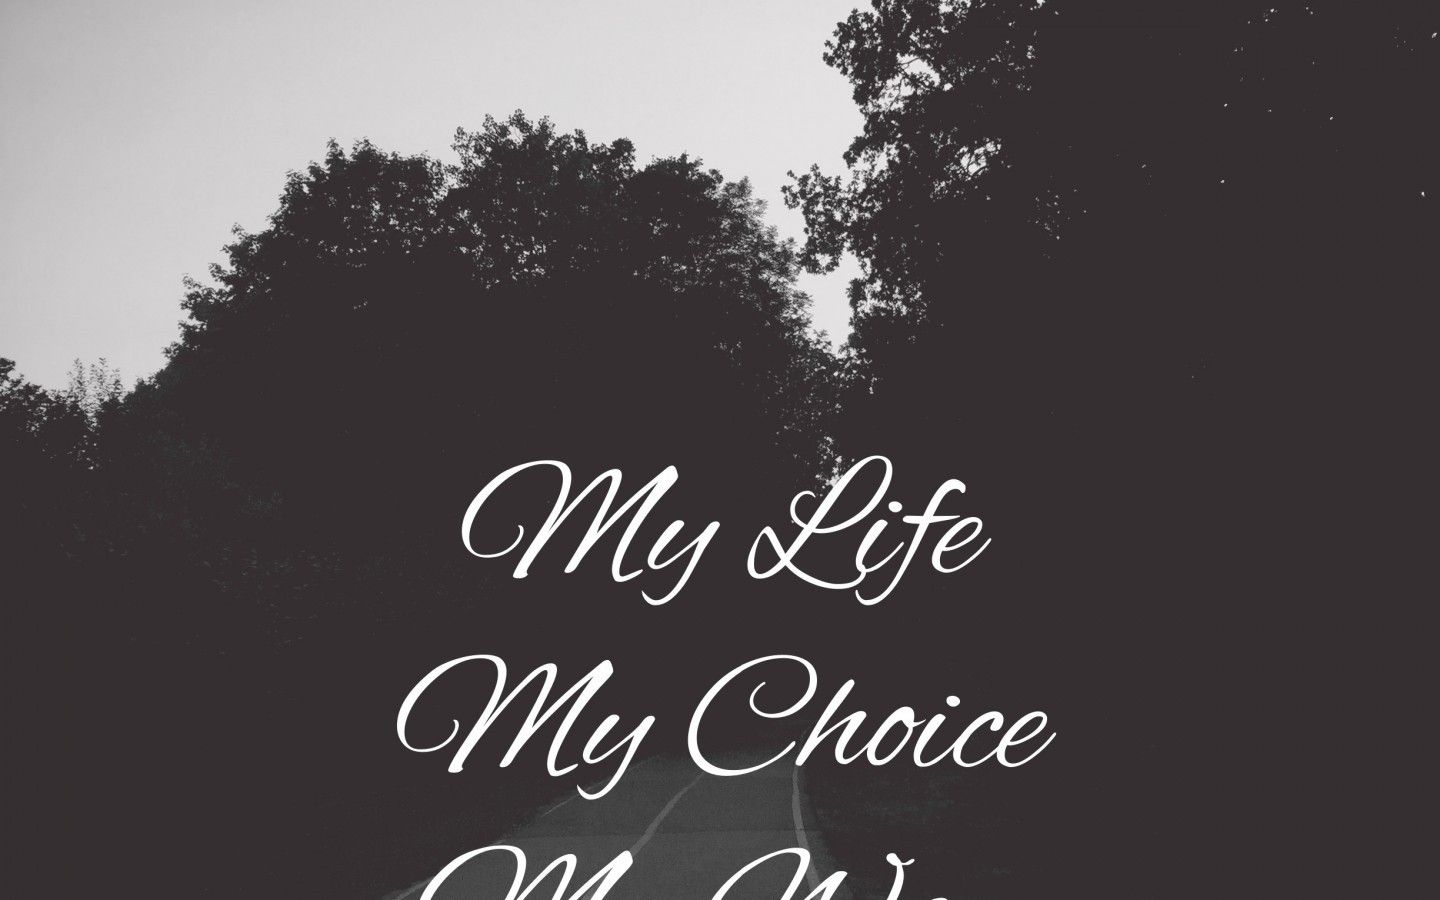 Download 1440x900 My Life My Choice My Way, Inscription, Quote Wallpaper for MacBook Pro 15 inch, MacBook Air 13 inch